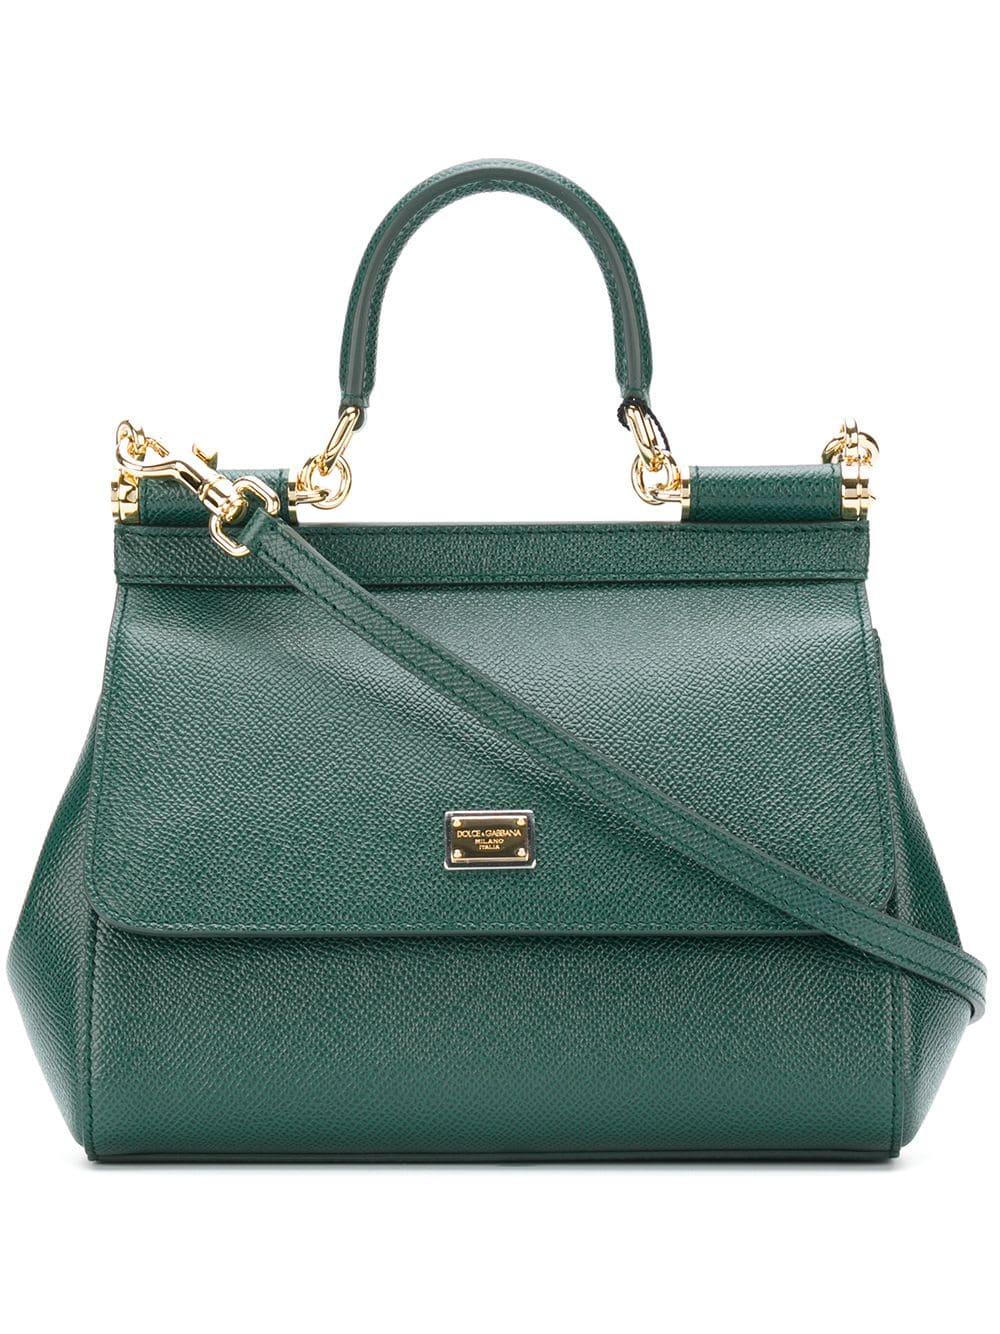 Dolce & Gabbana Leather Small Sicily Bag in Green - Lyst